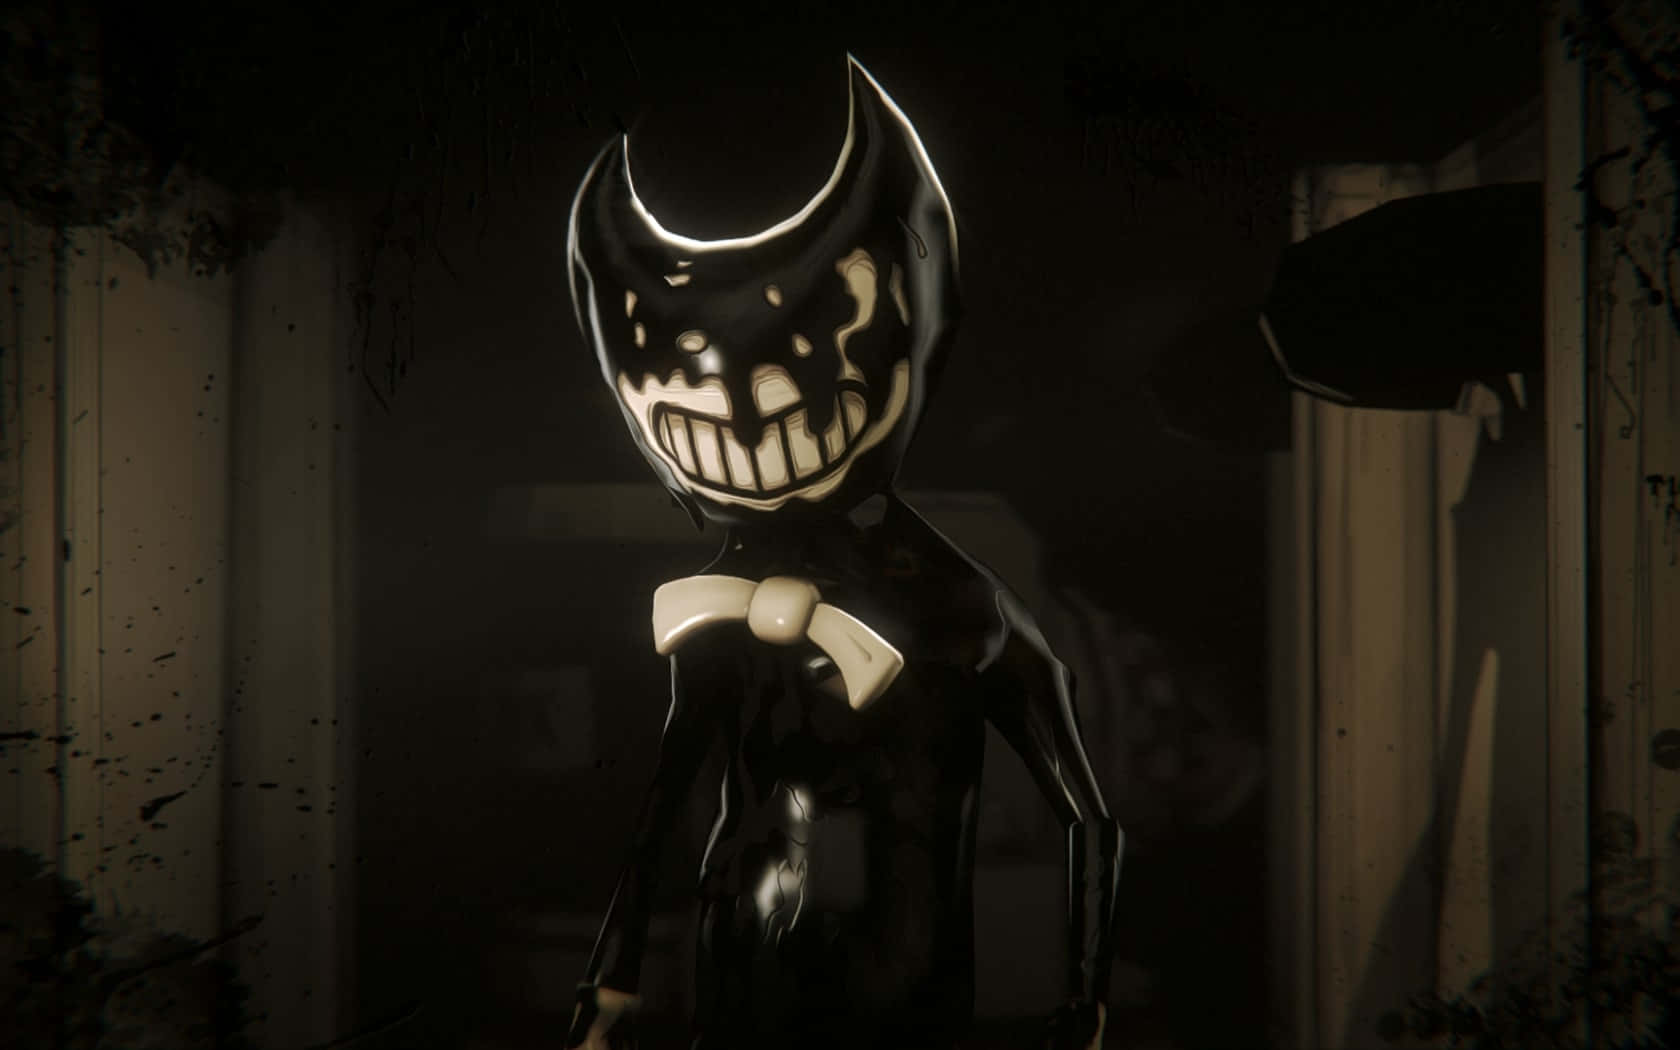 Bendy Strikes A Pose In A Vintage Monochrome Setting Background